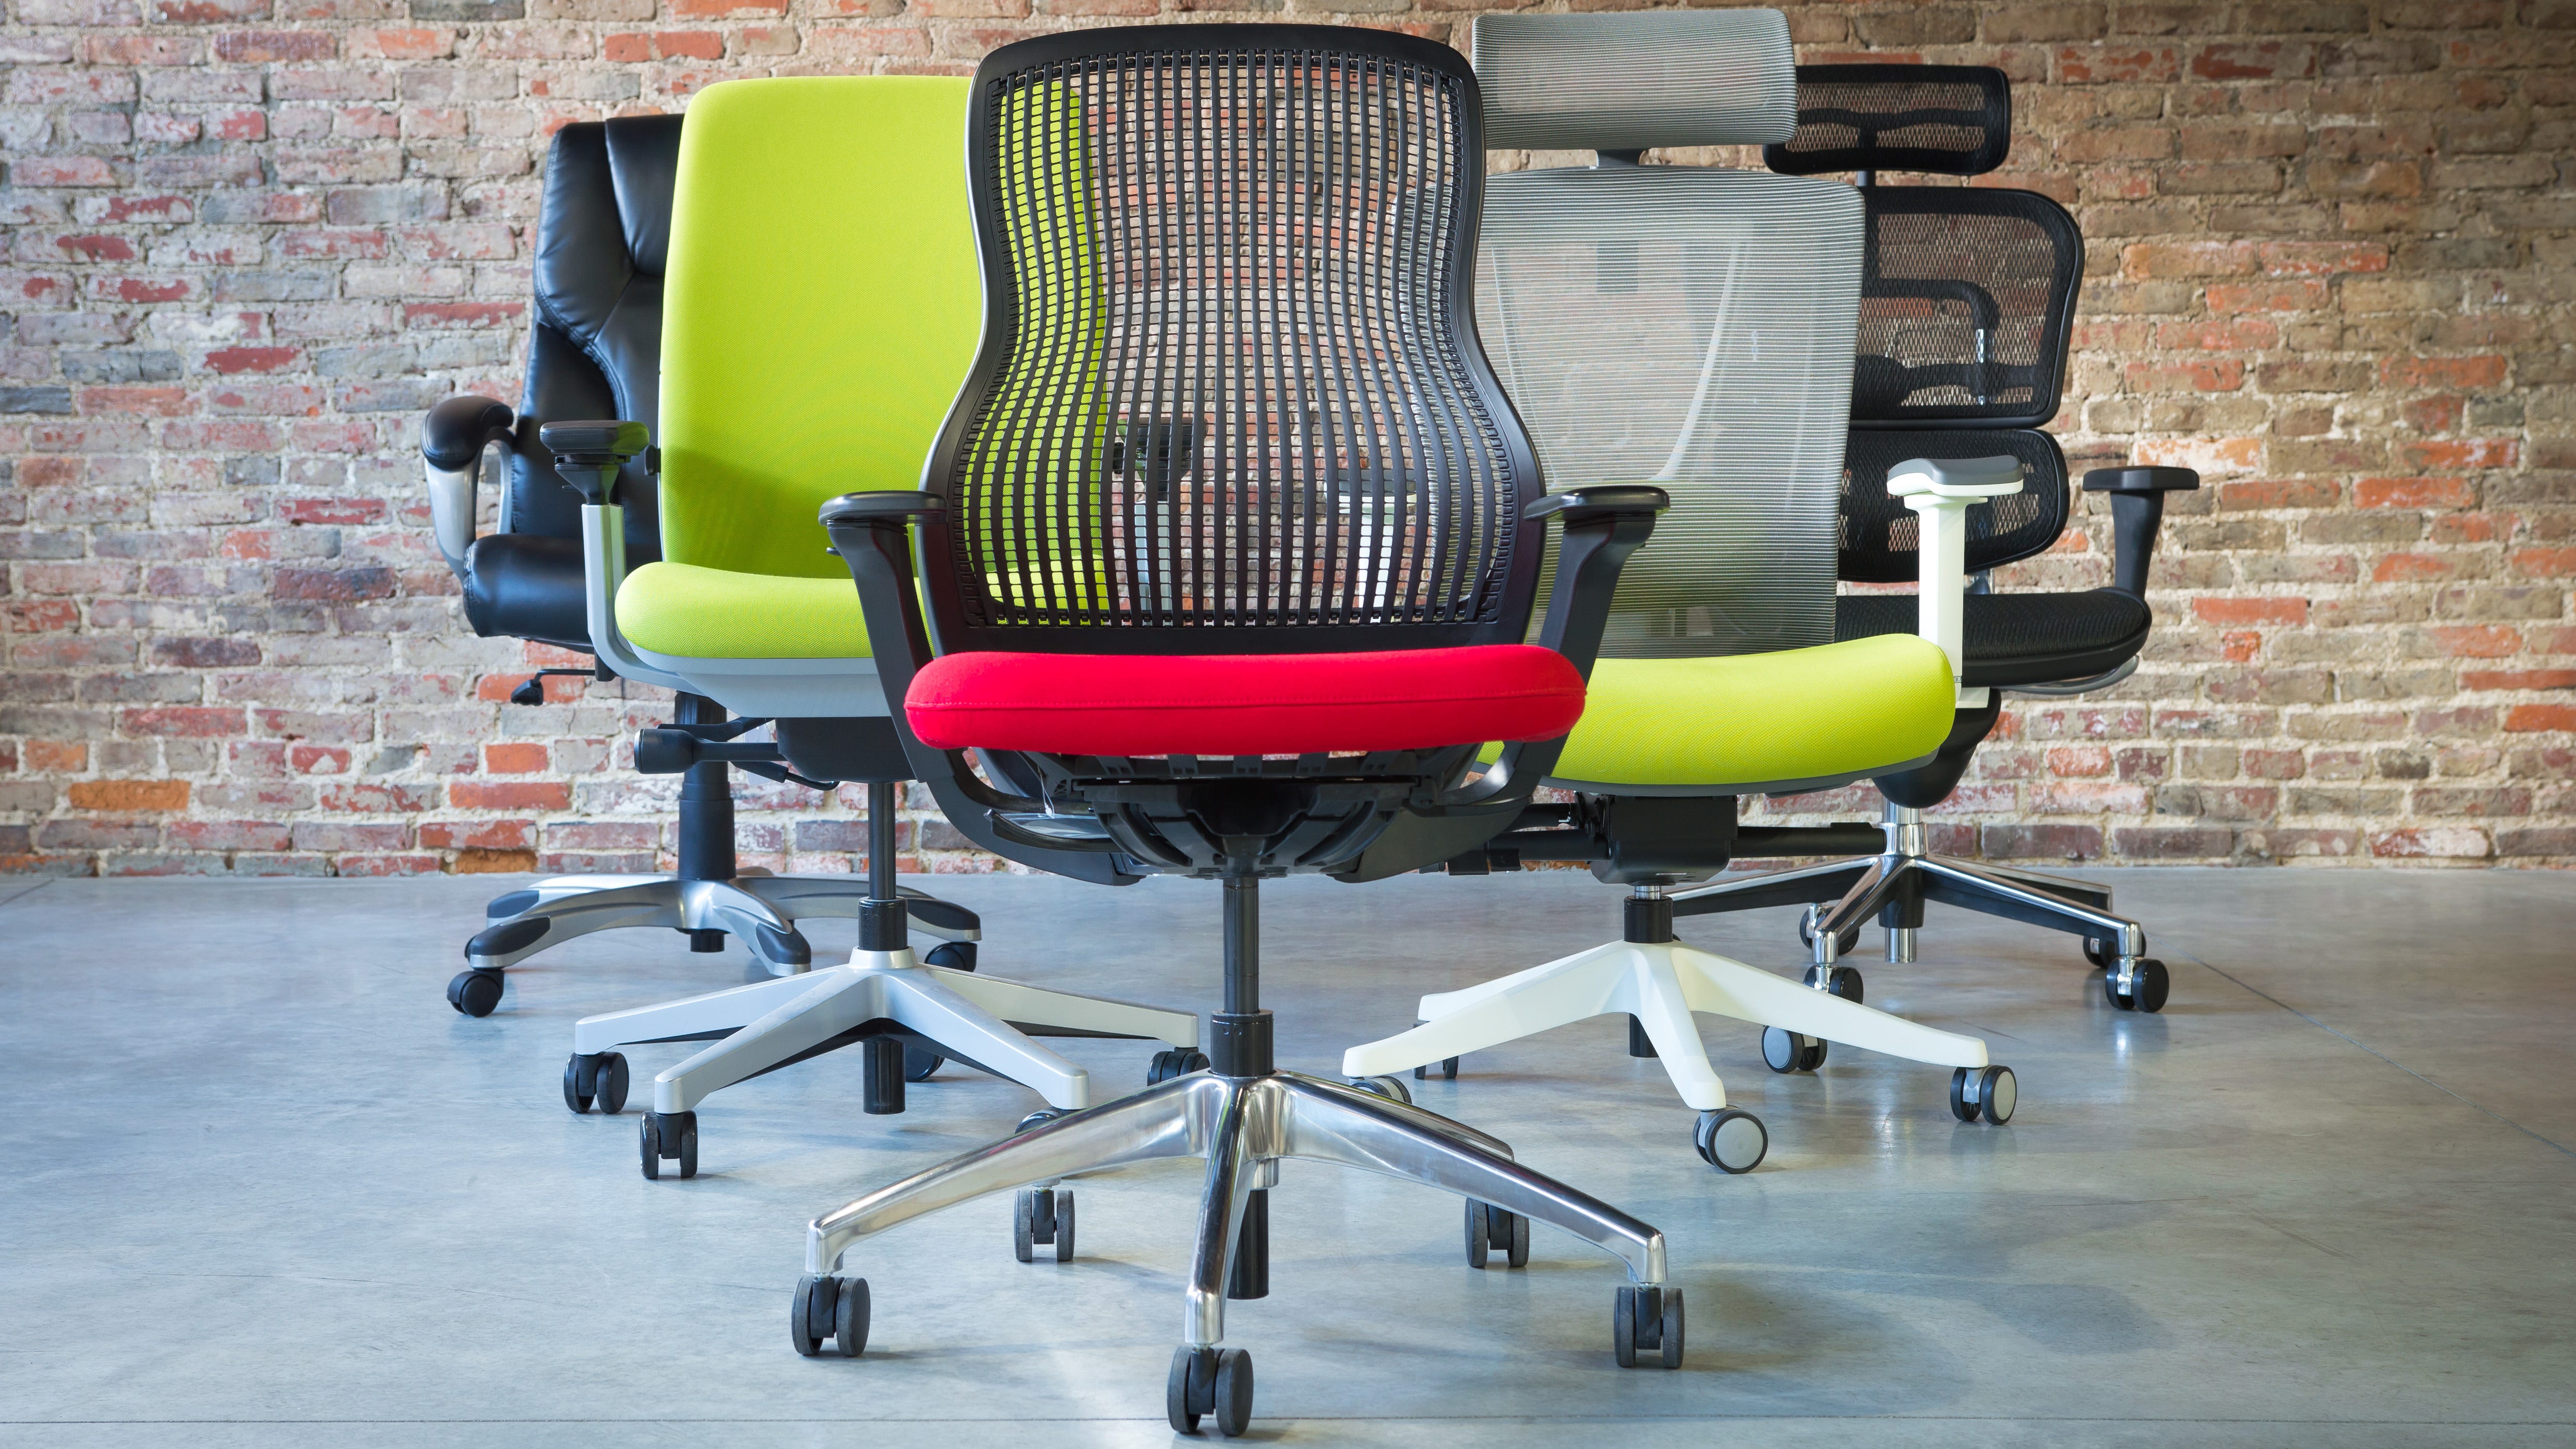 Looking to Buy The Best Office Chair This Year. Find Out The Top 10 Urban Shop Office Chairs